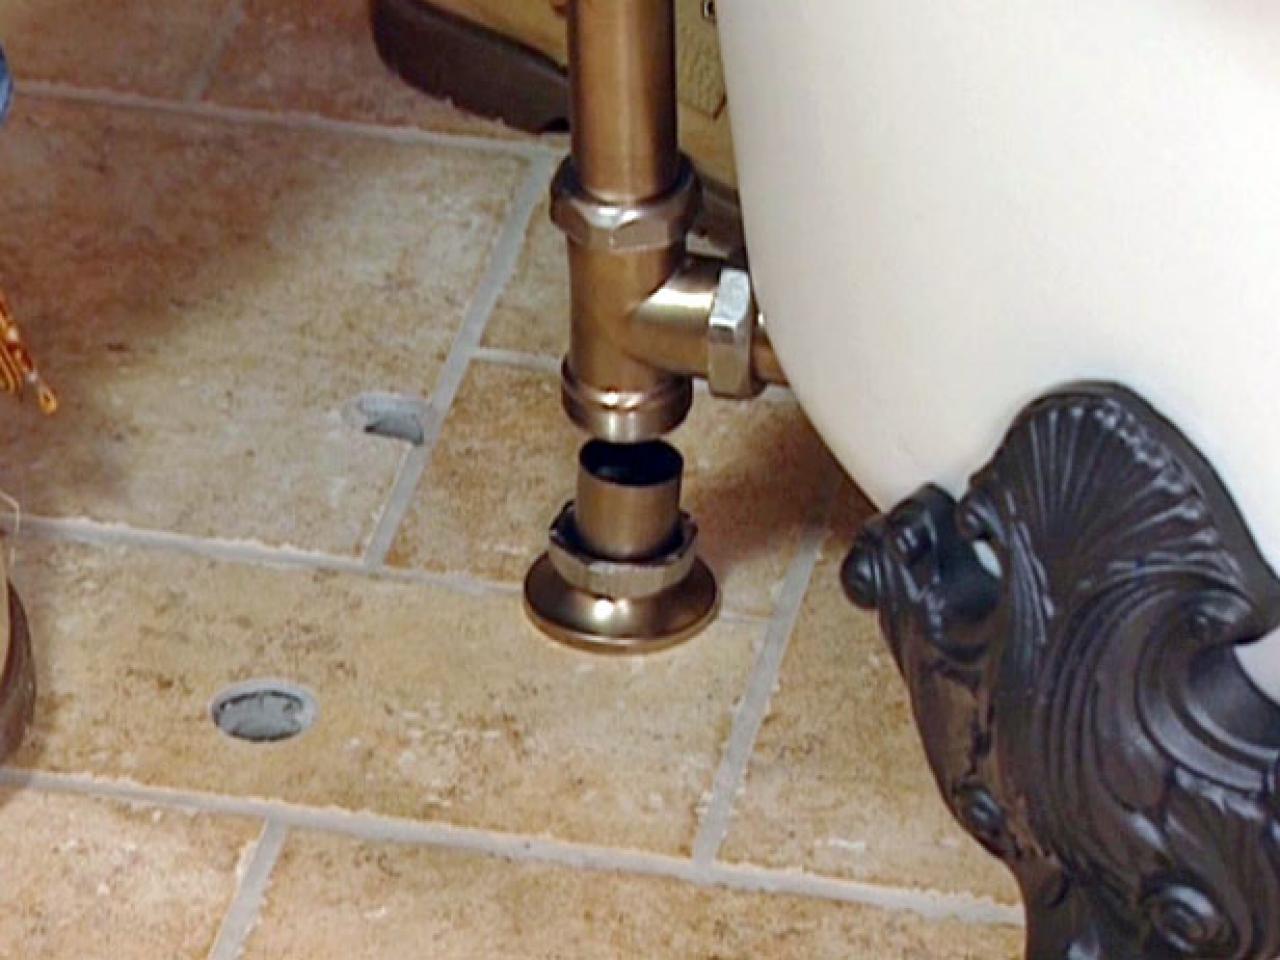 Install Plumbing For A Claw Foot Tub, How To Install Plumbing For A Bathtub